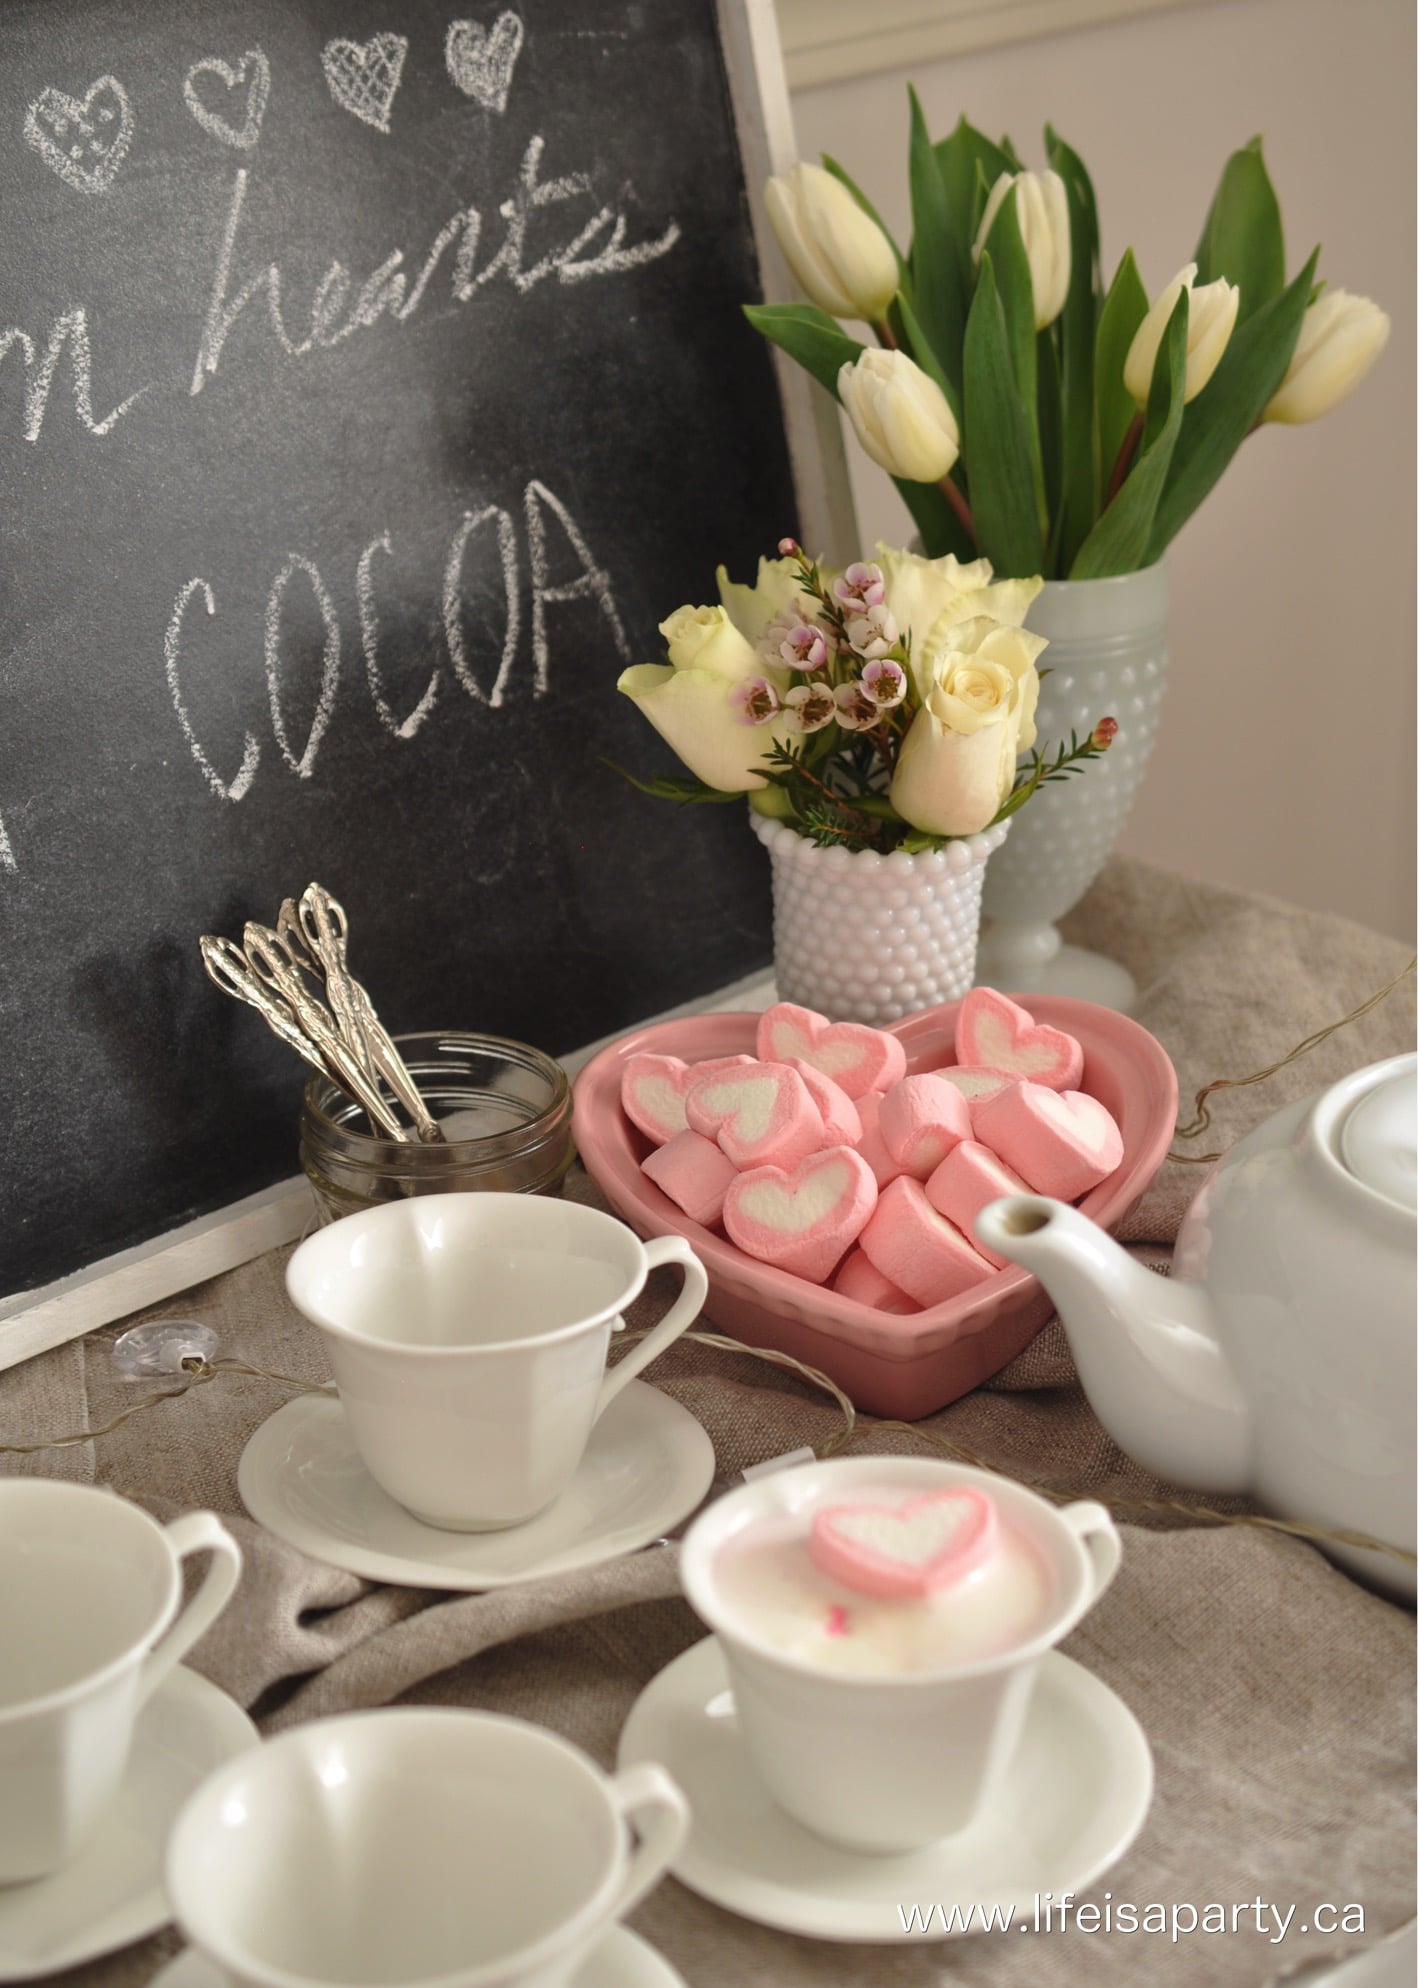 Valentine's Day Breakfast: the perfect inspiration with decor and menu for celebrating Valentine's Day with family and friends.